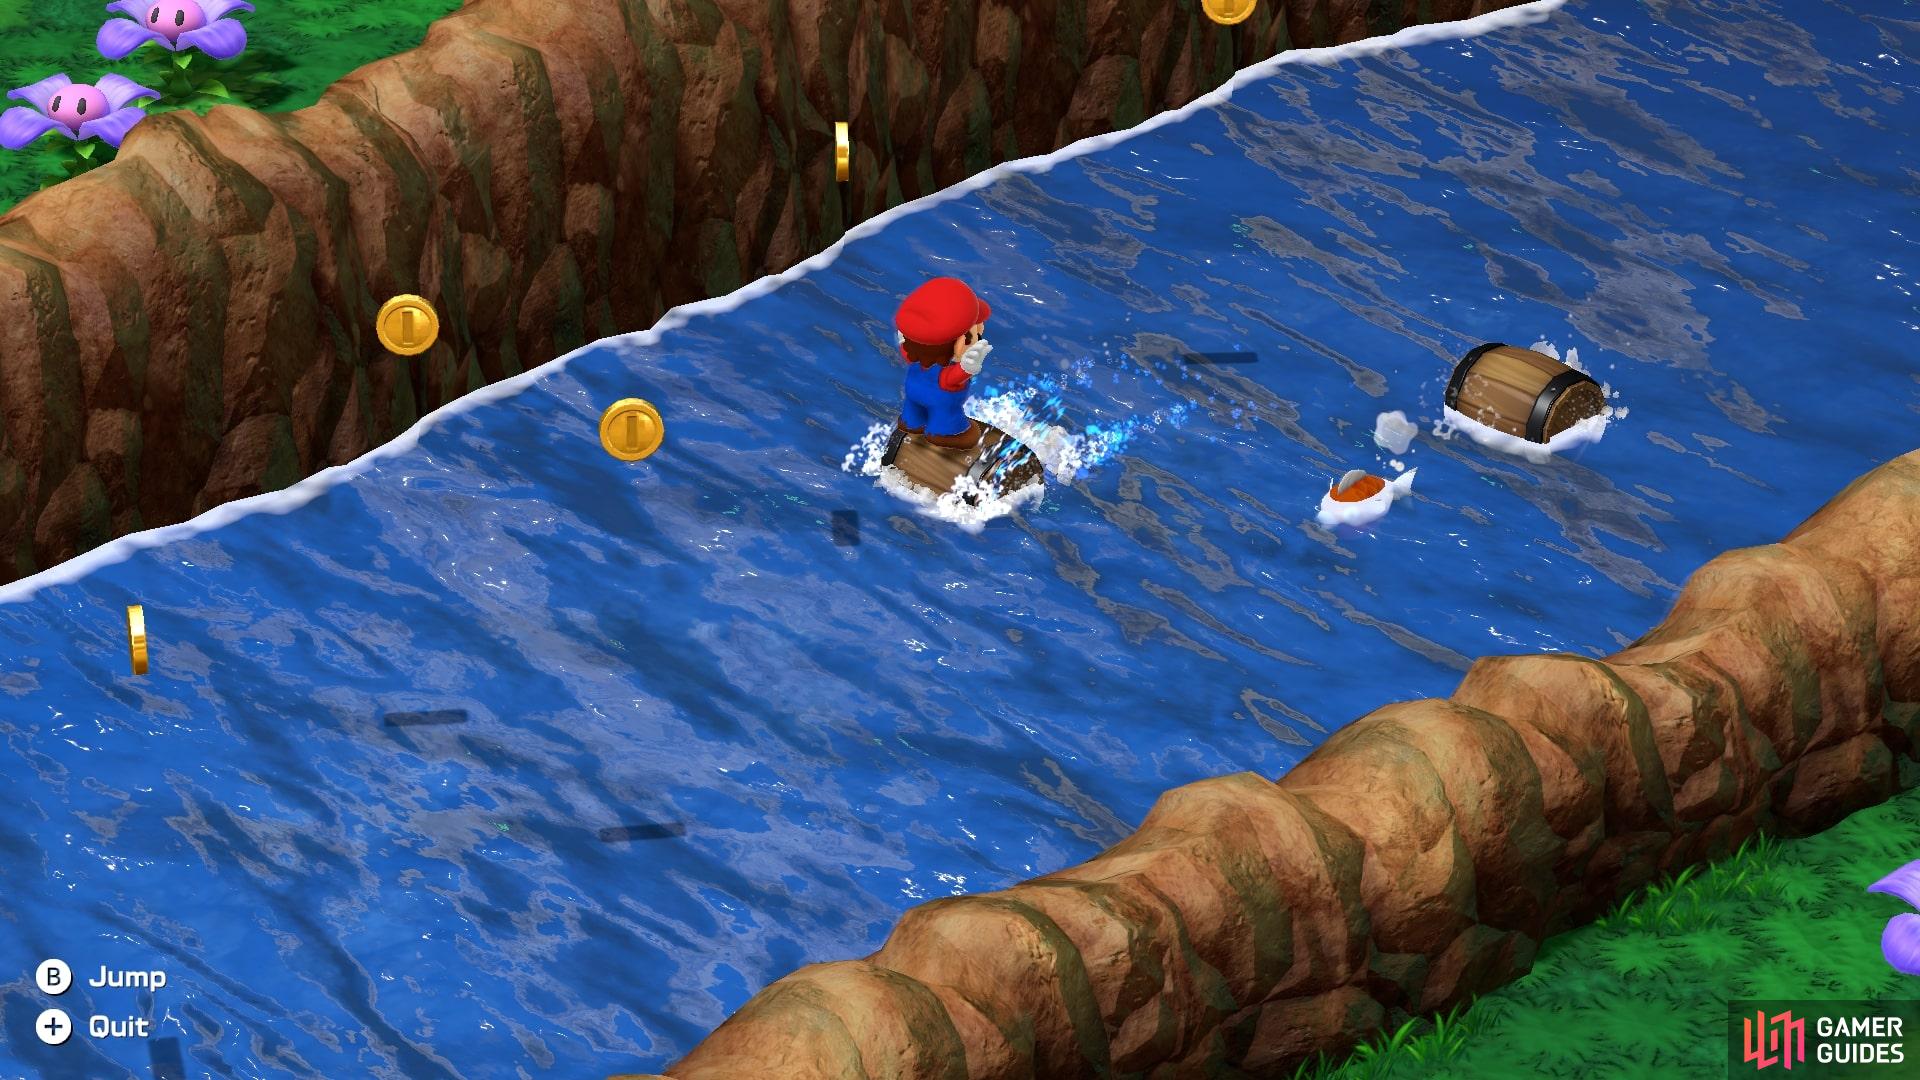 Be sure to jump over the fish, and change course if one is attacking Mario from behind.